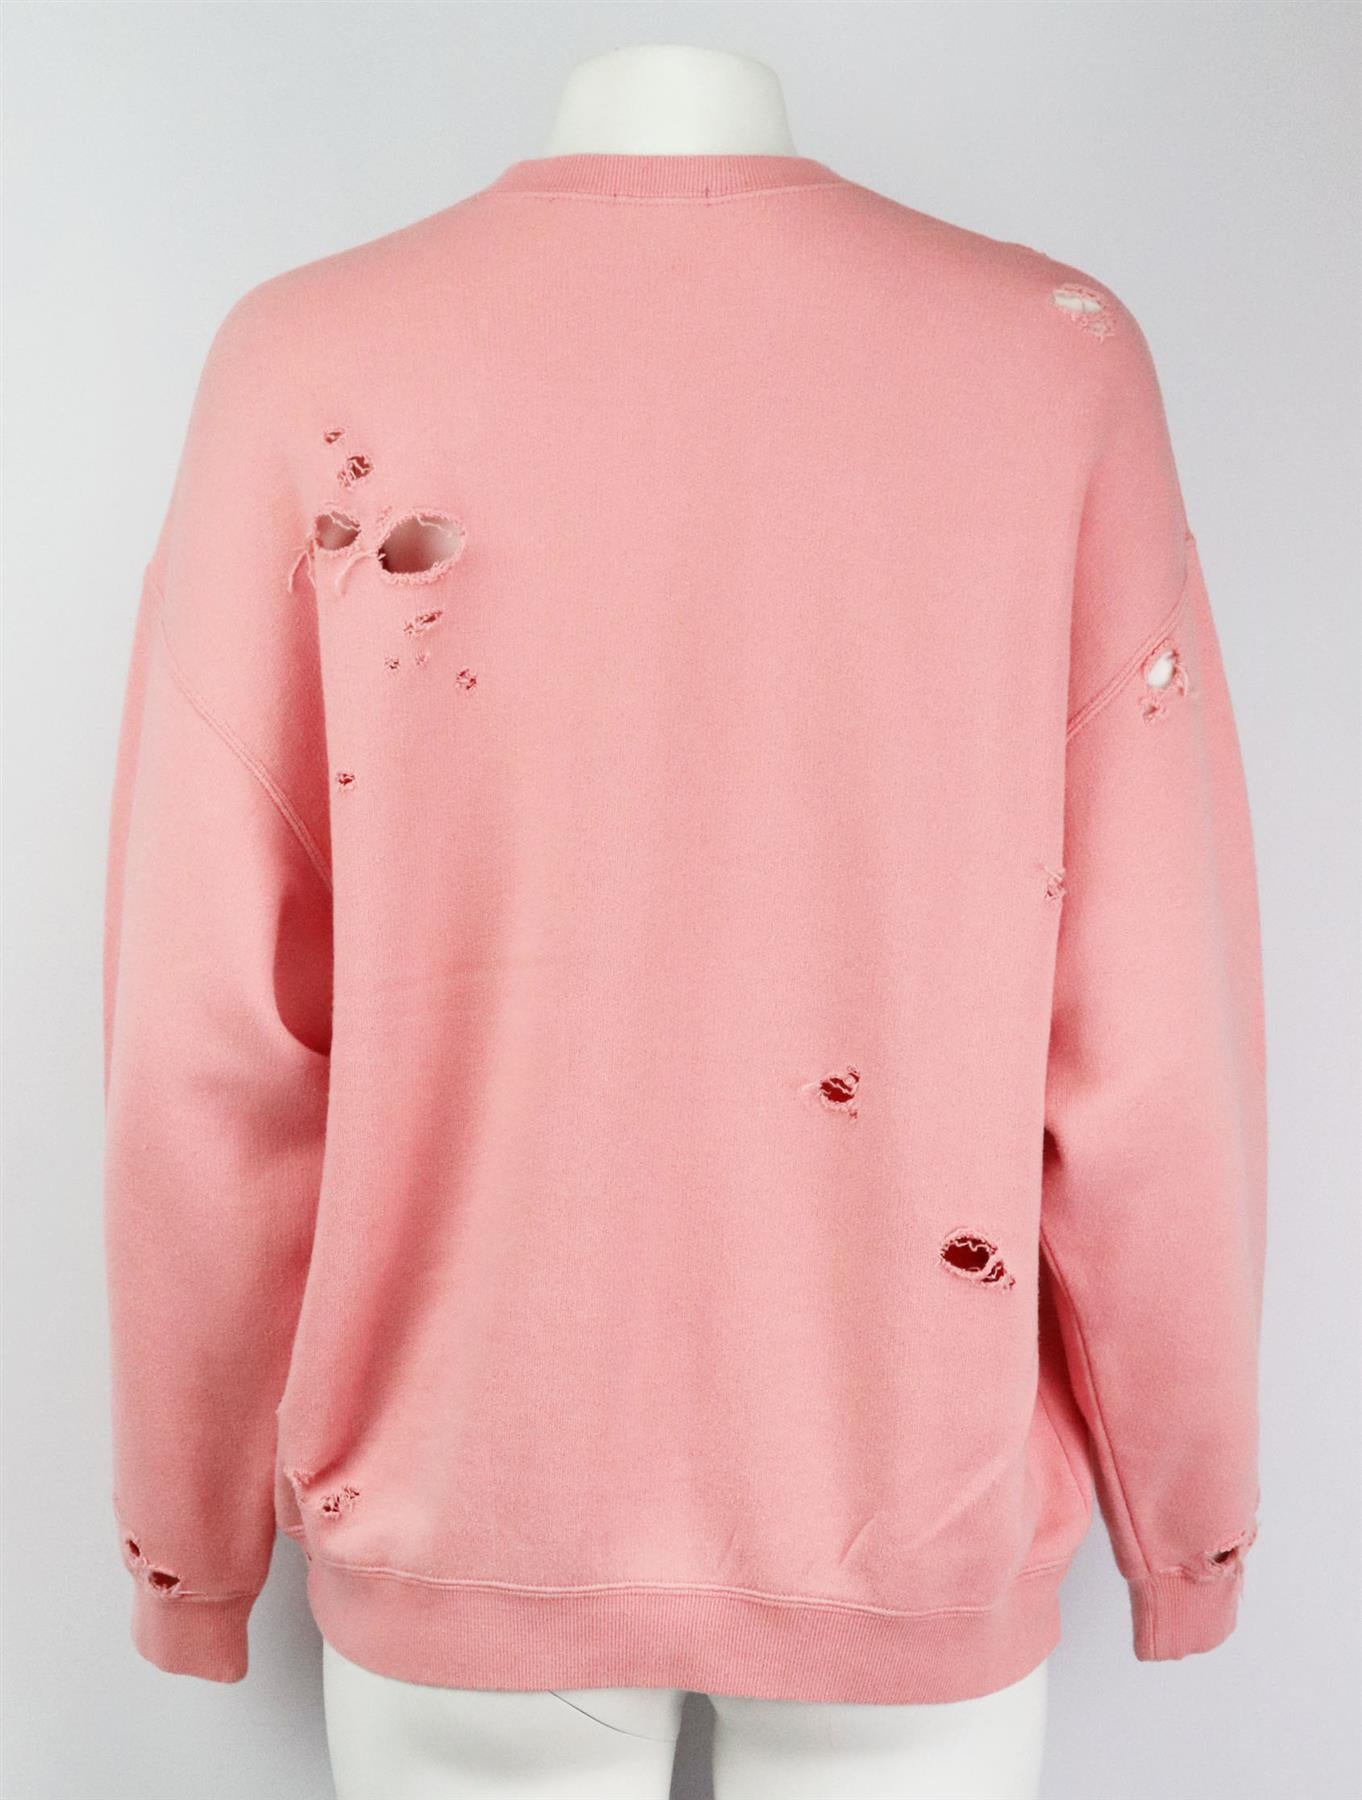 R13 DISTRESSED PRINTED COTTON TERRY SWEATSHIRT XSMALL